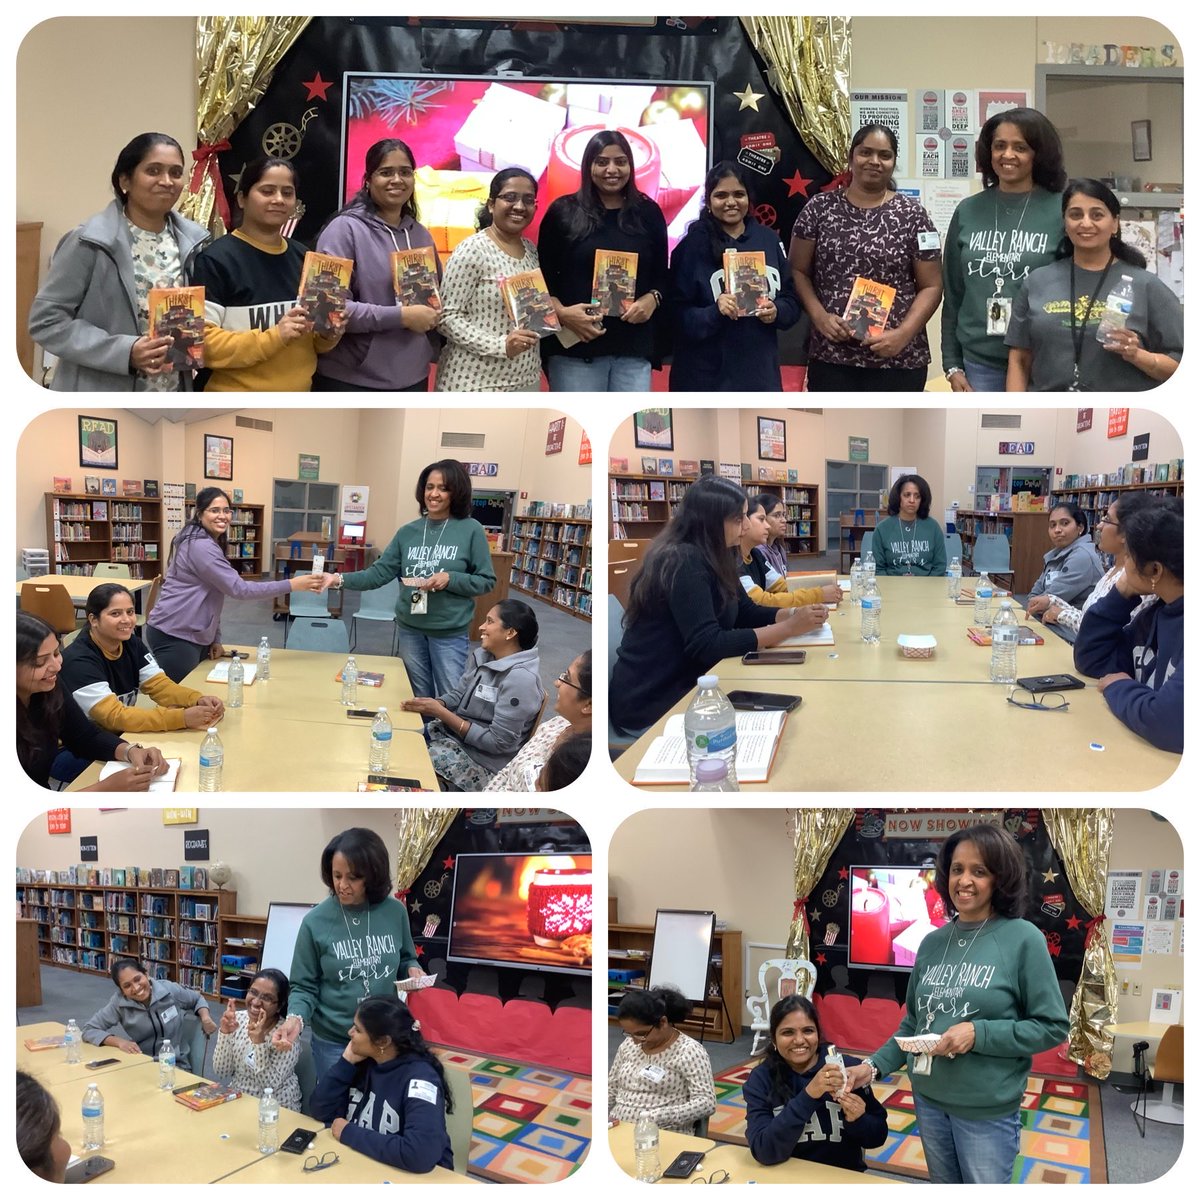 Parent book club was a success! Thanks for stopping by and encouraging us @CArterbery. We had some deep conversations about the “Thirst” @varshabajaj. And, there were some lucky winners! @VRE_STARS @CISDlib #CISDMissionPossible